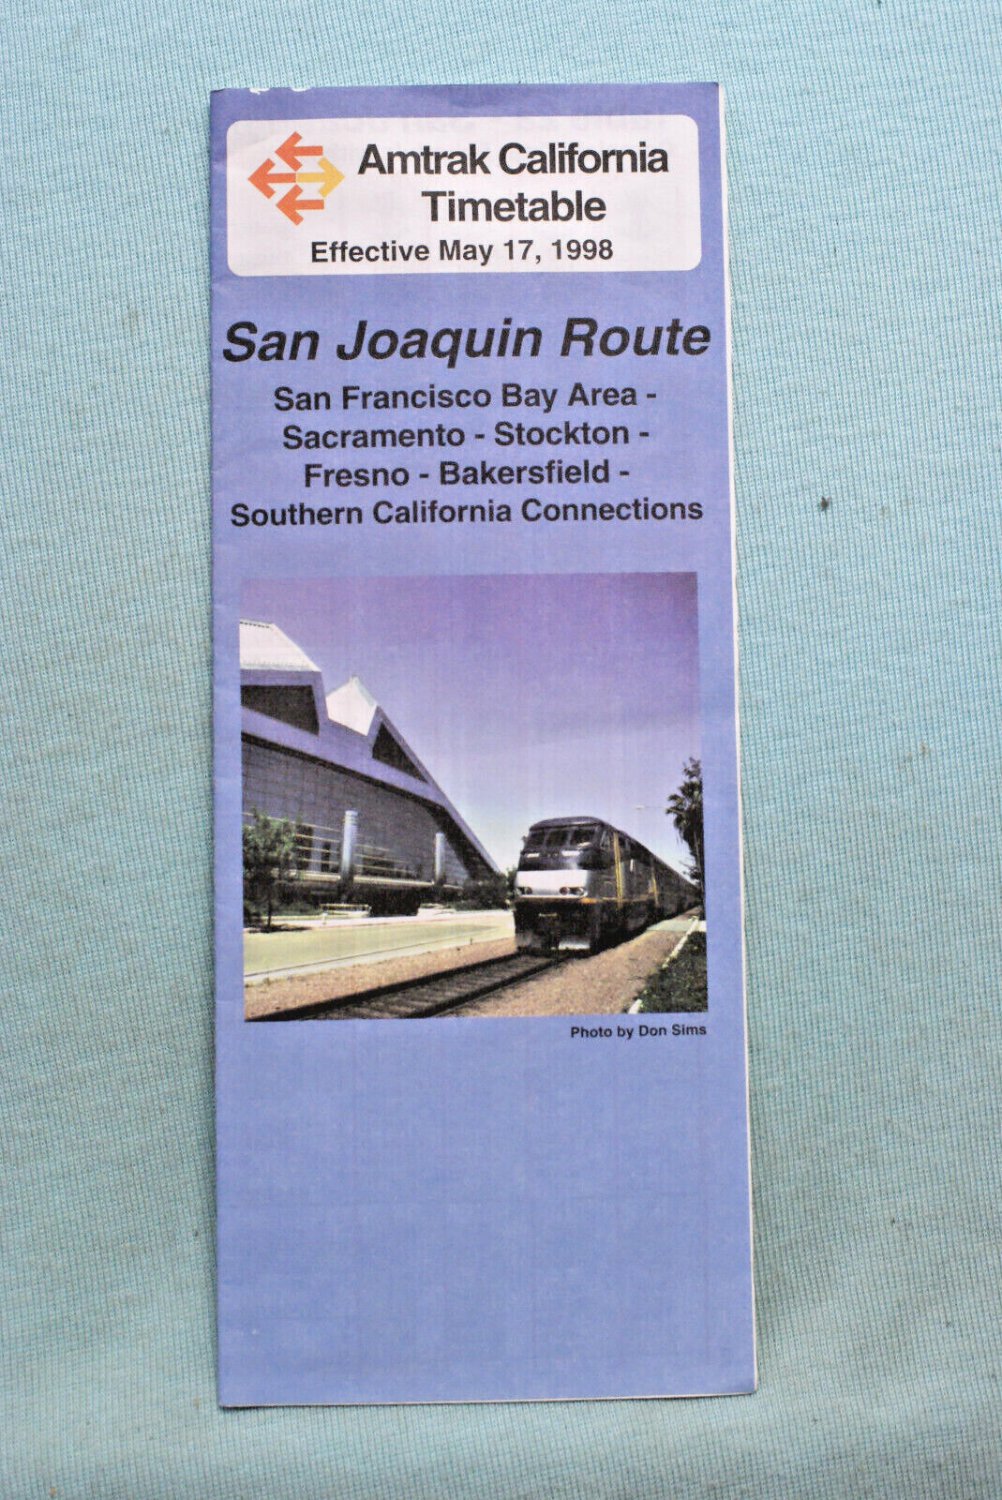 San Joaquin Route - Amtrak Timetable - May 17, 1998